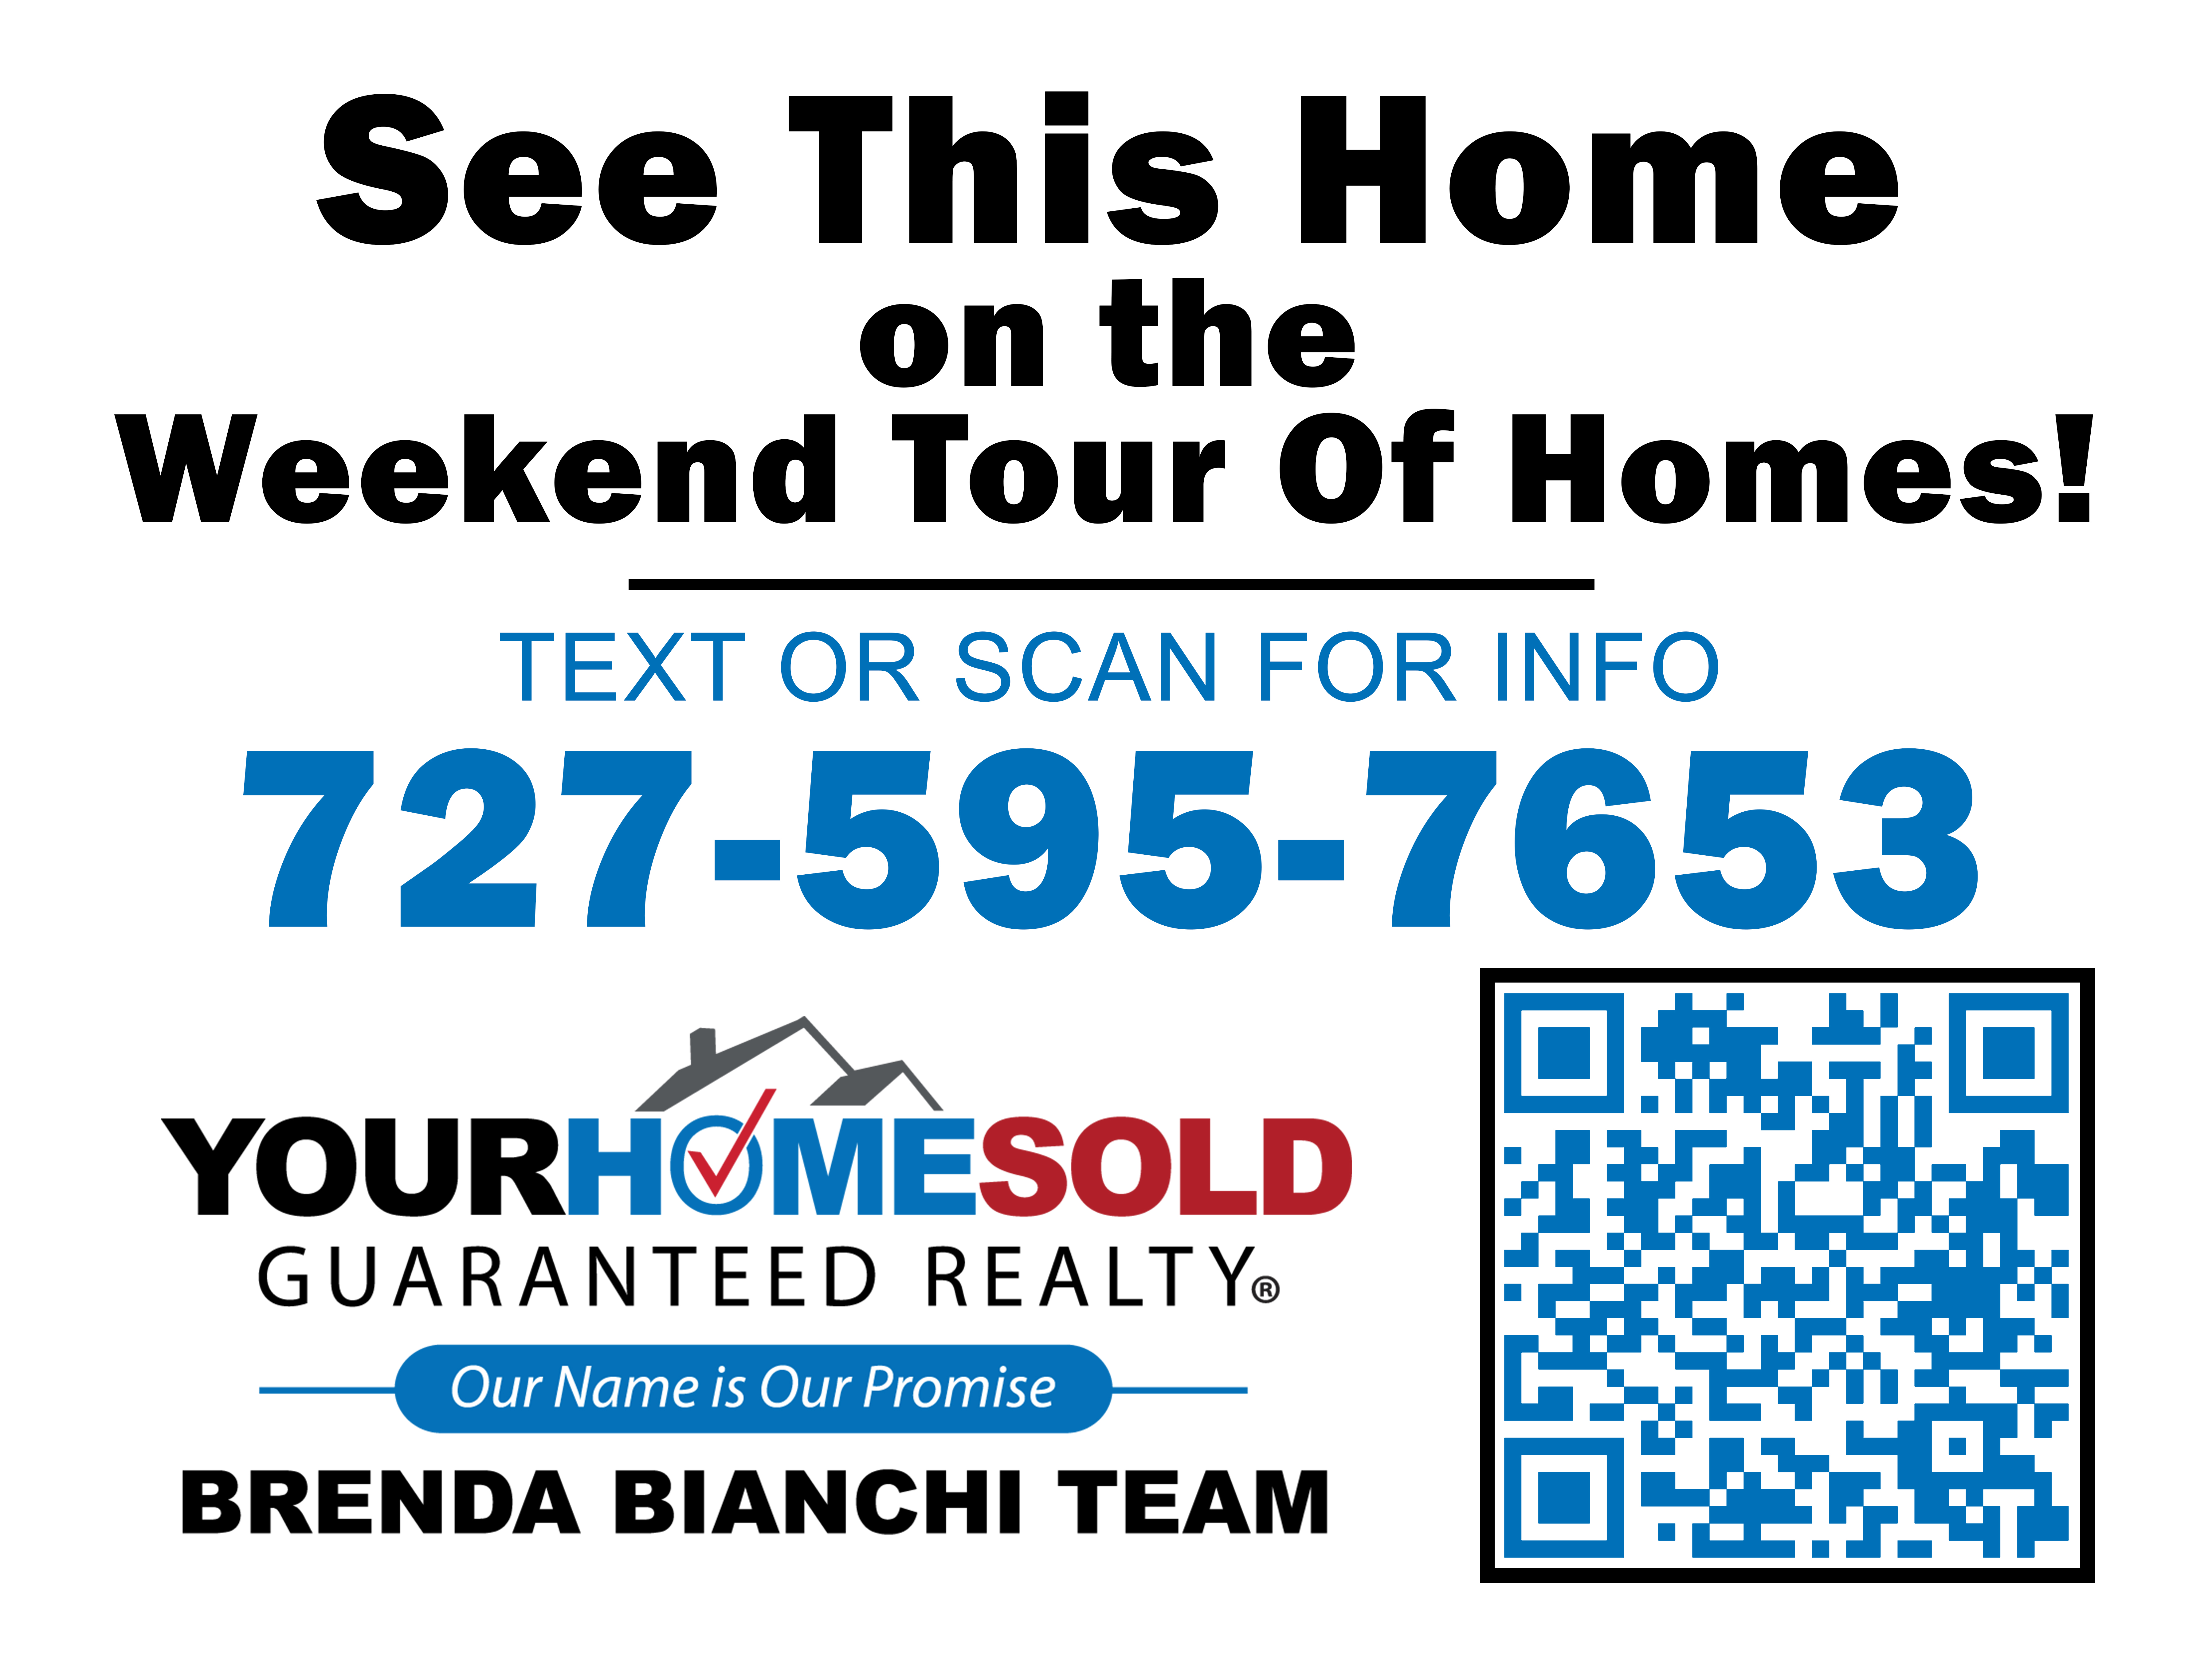 Tour of Homes Sign 18x24.jpg